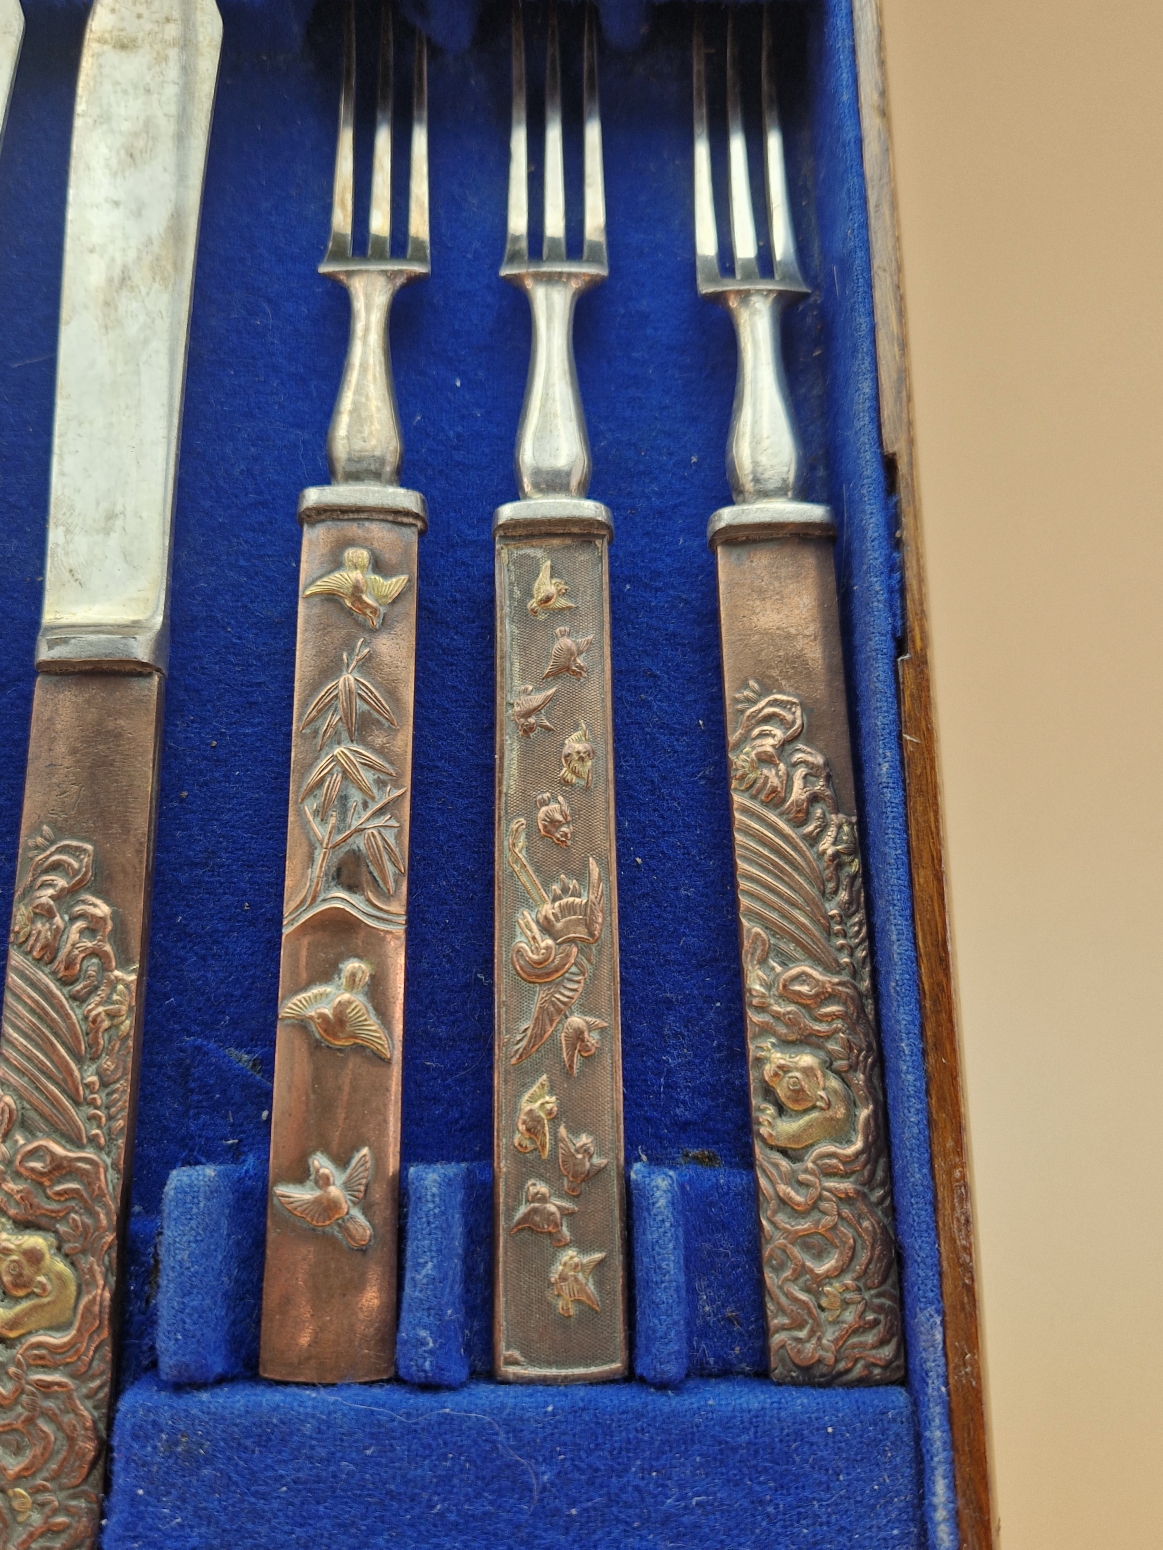 A TRAY OF SIX FRUIT KNIVES AND FORKS, EACH WITH PARCEL GILT COPPER JAPANESE KOZUKA HANDLES - Image 4 of 9